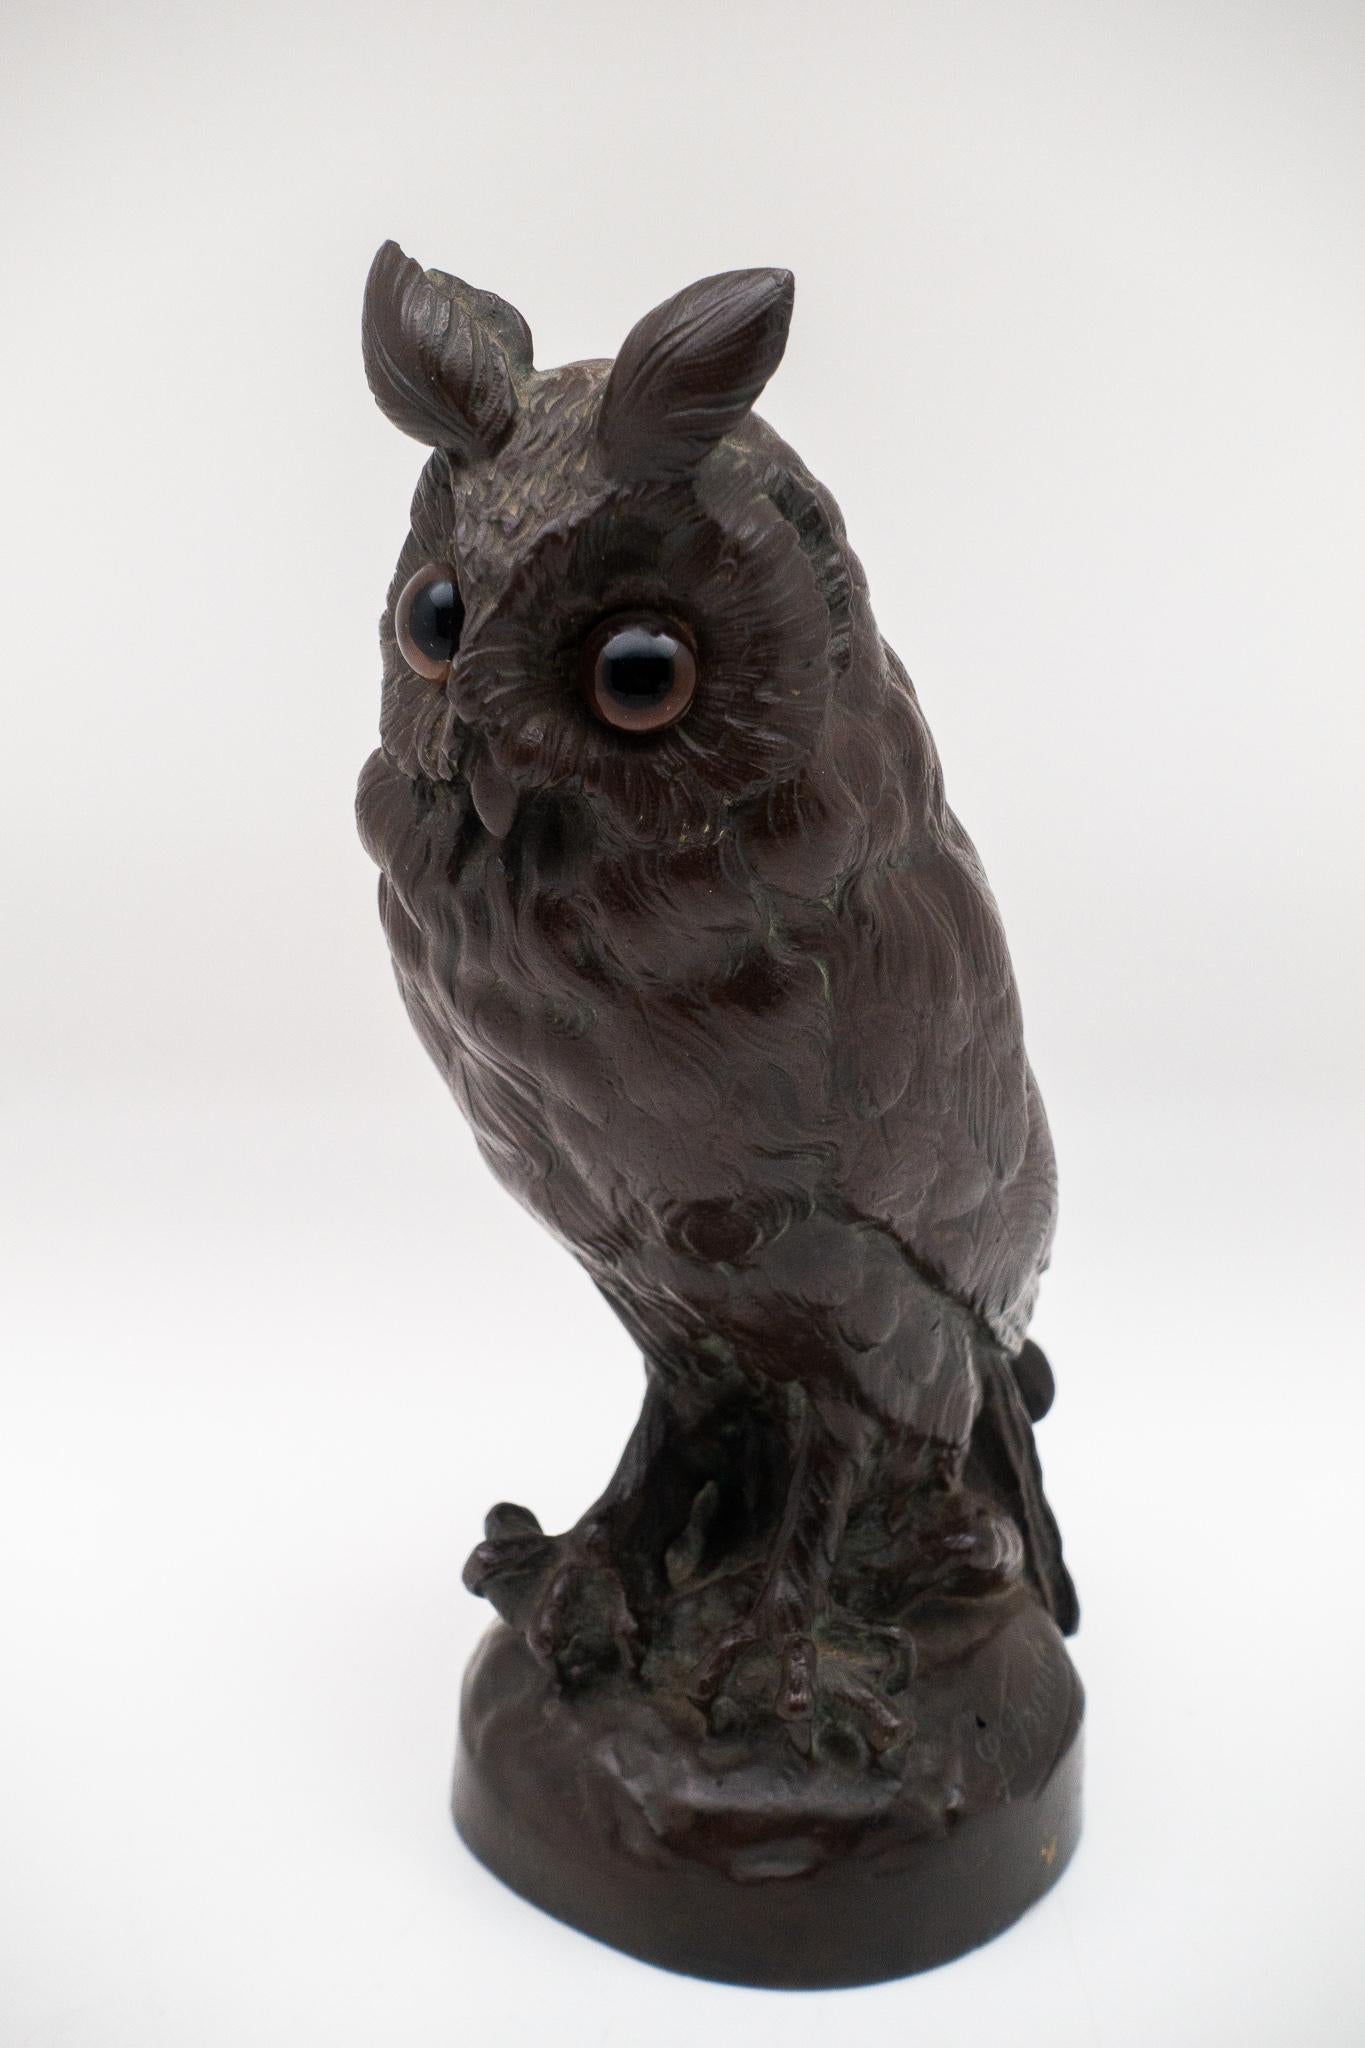 Bronze 19th century sculpture of perched owl fitted with glass eyes, by L. Frouin (signed).